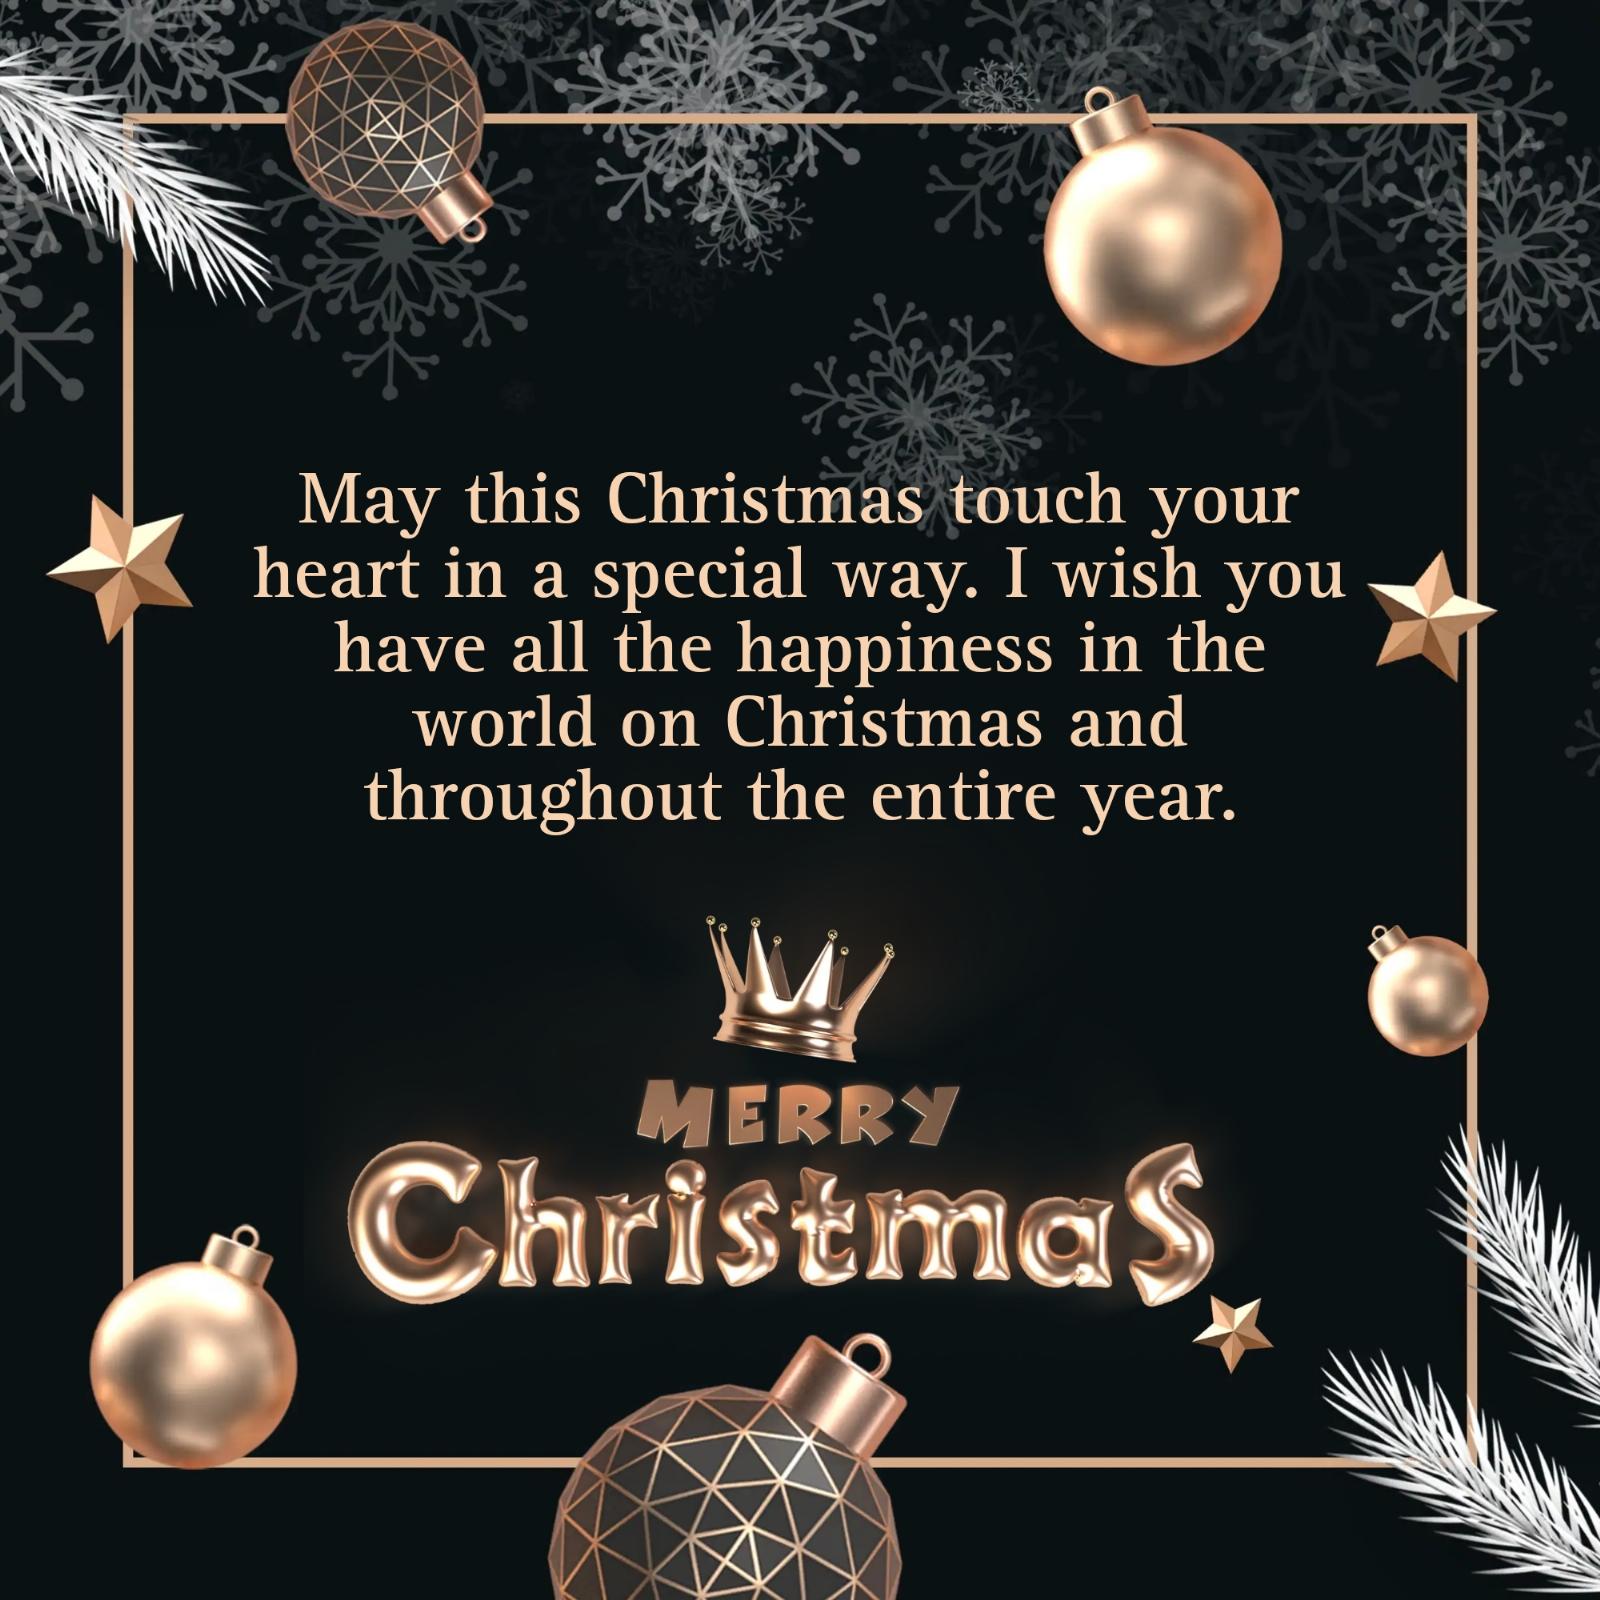 May this Christmas touch your heart in a special way